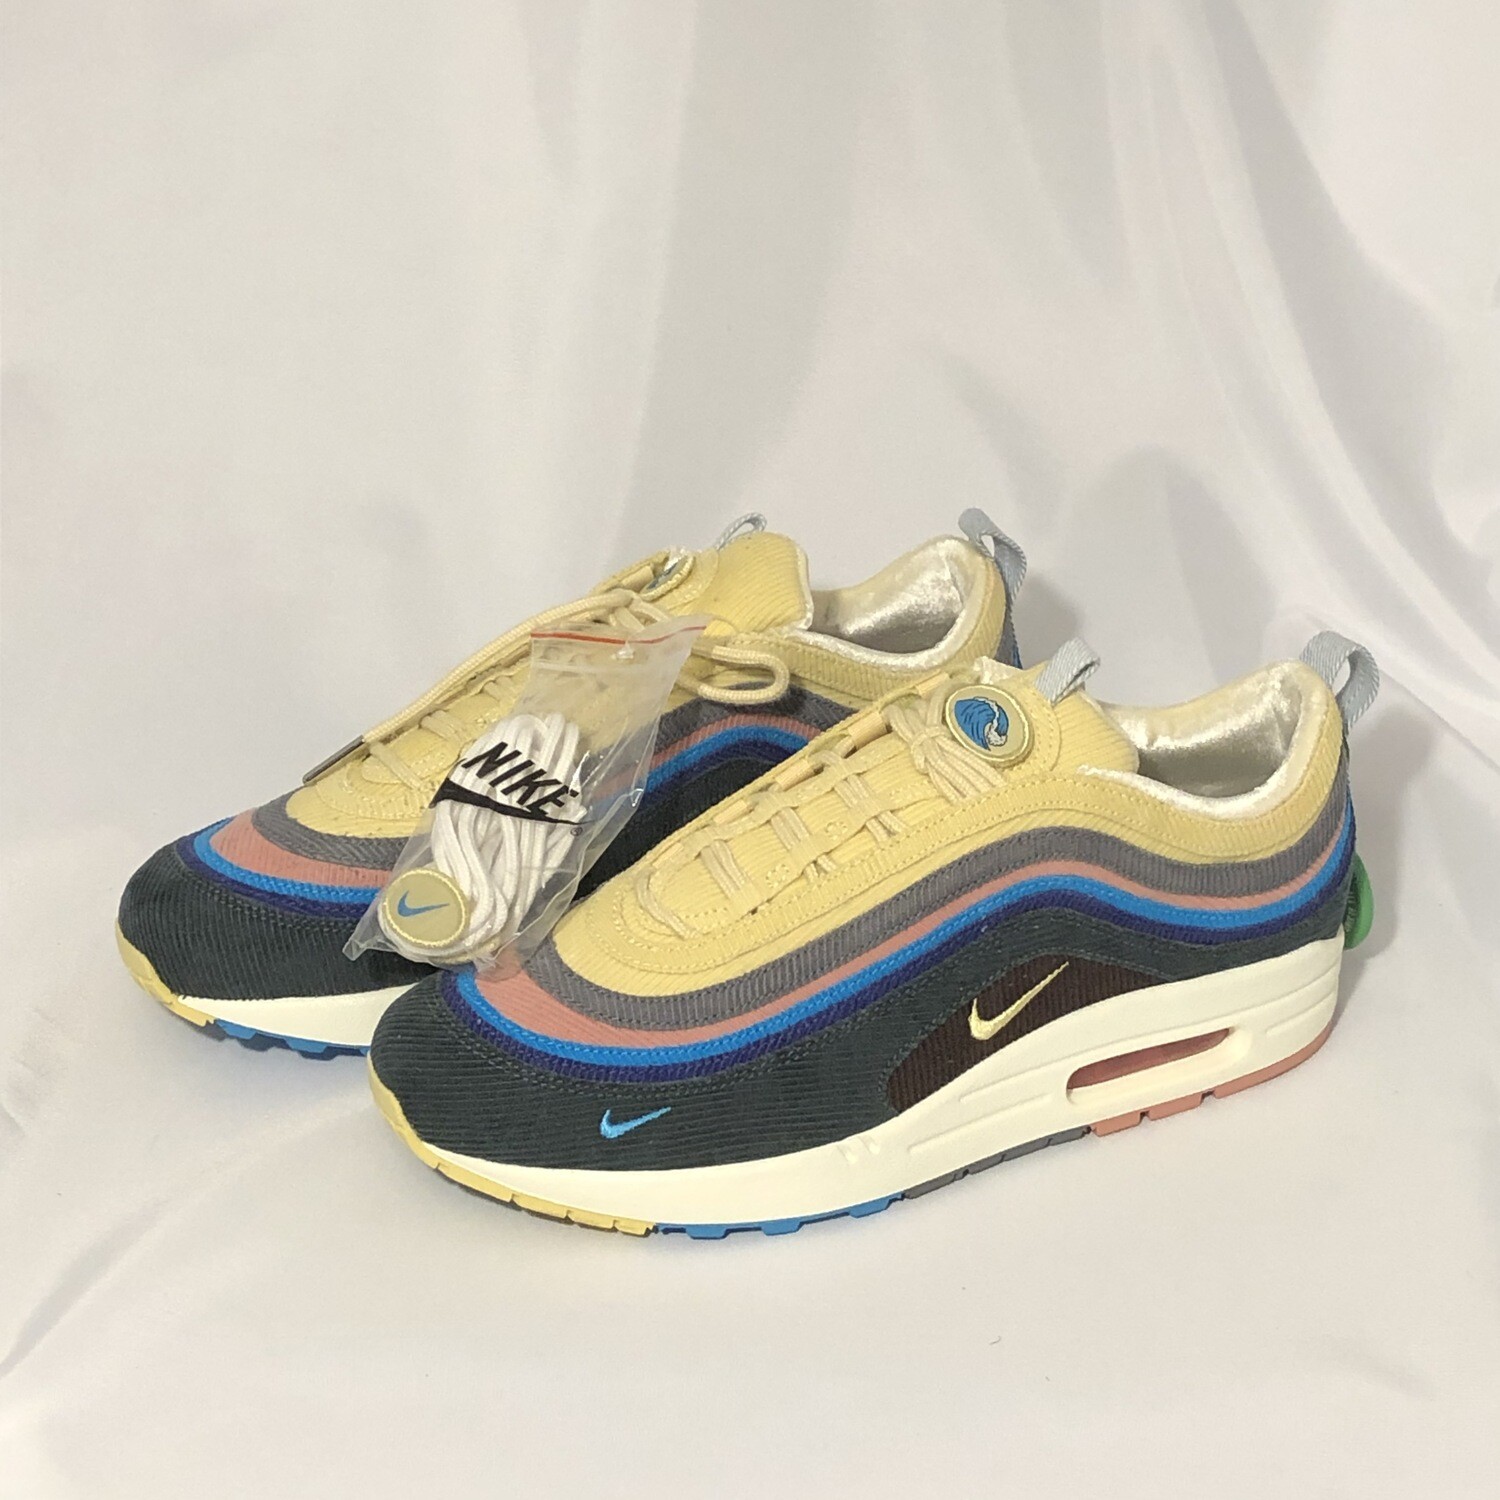 NIKE AIR MAX 1/97 SEAN WOTHERSPOON MEN'S SIZE 10